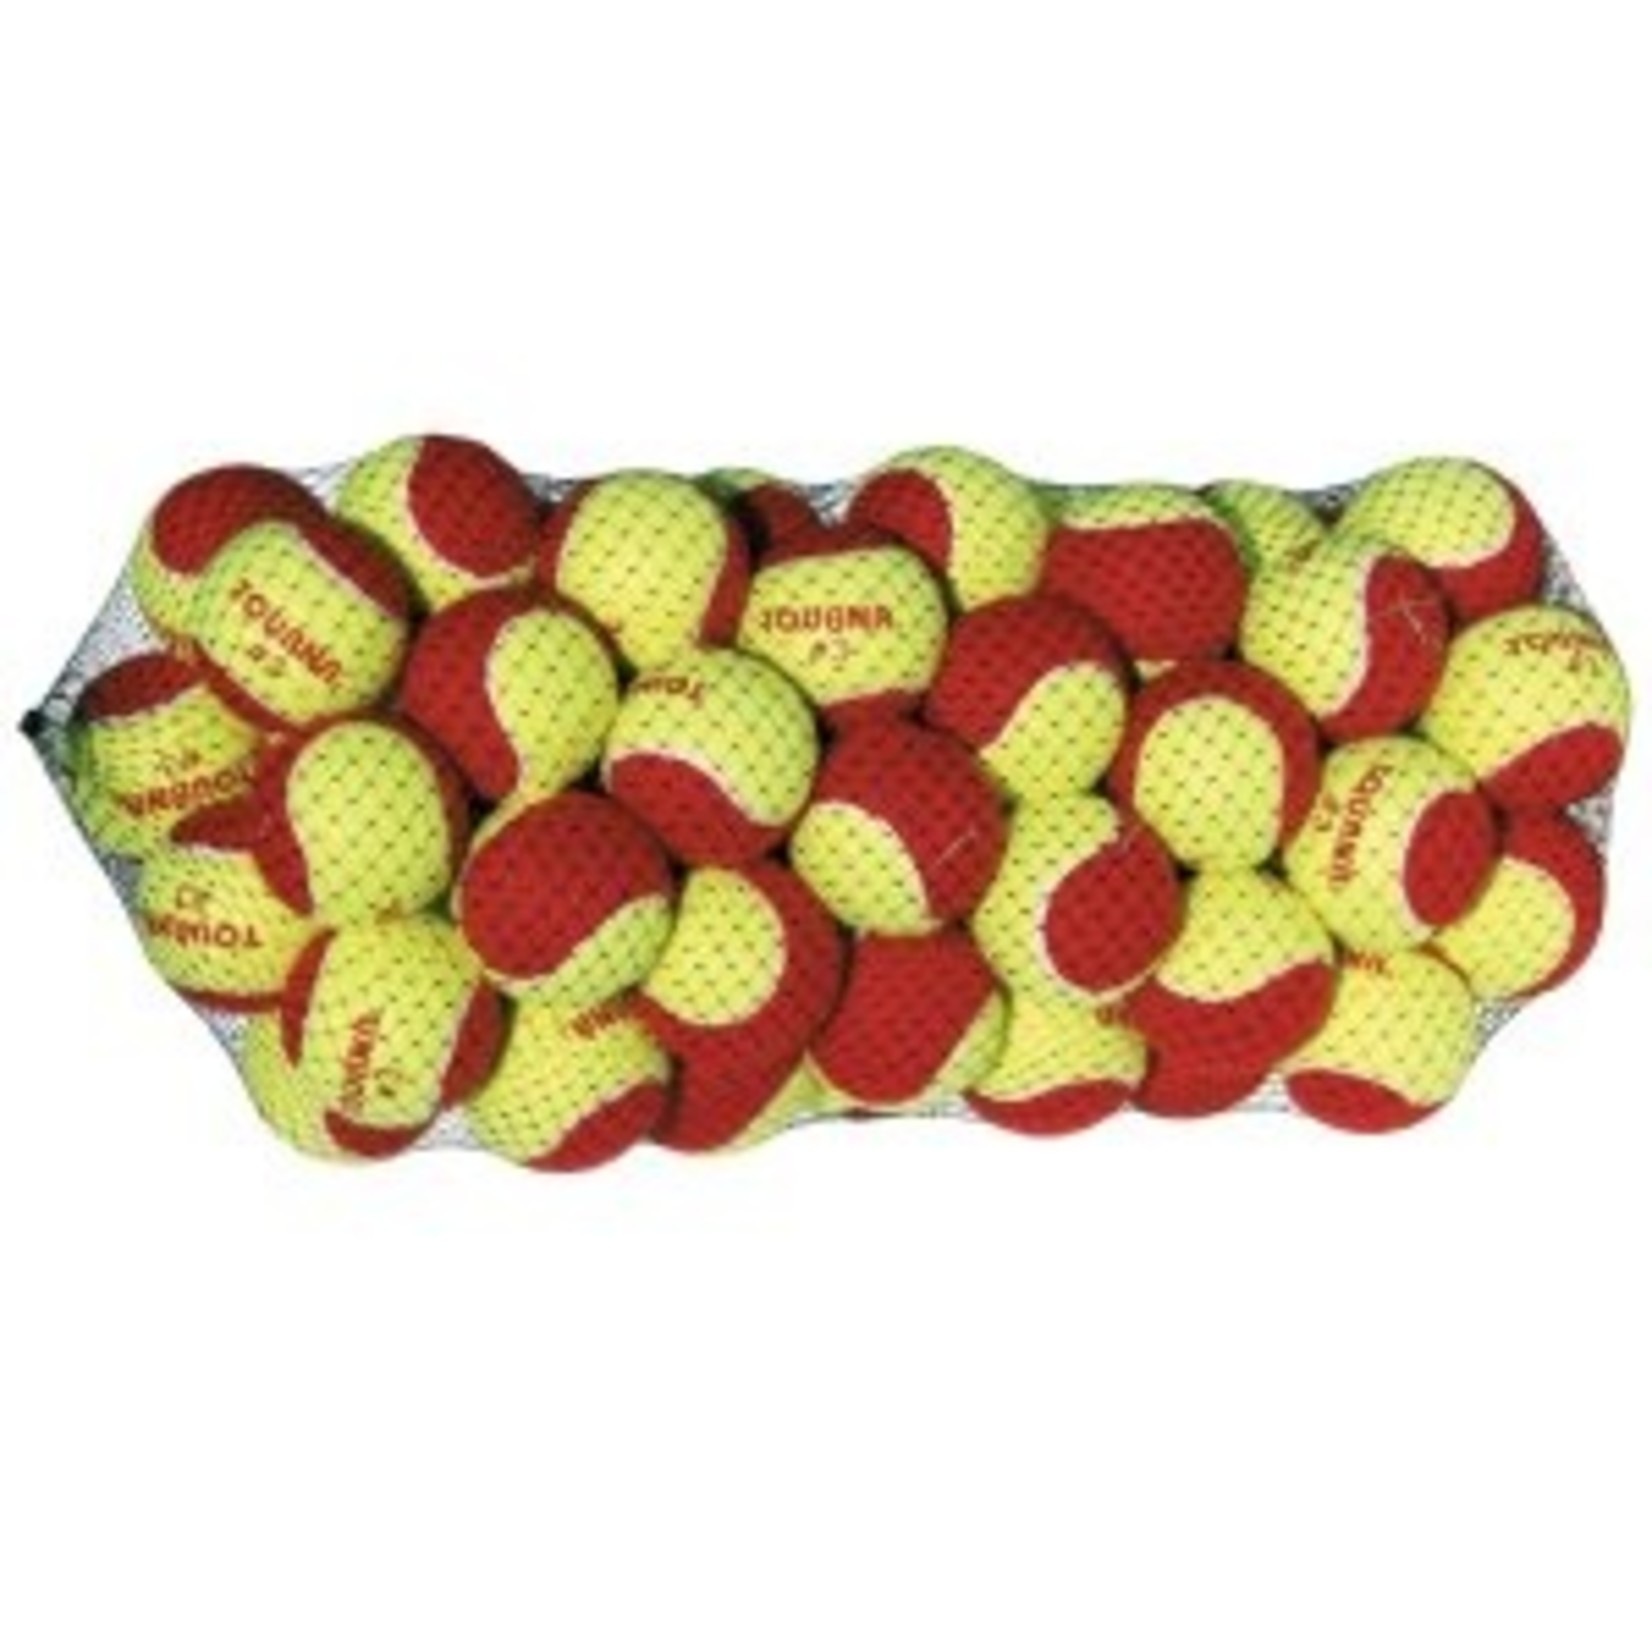 Tourna Red Ball 75% Reduced Speed